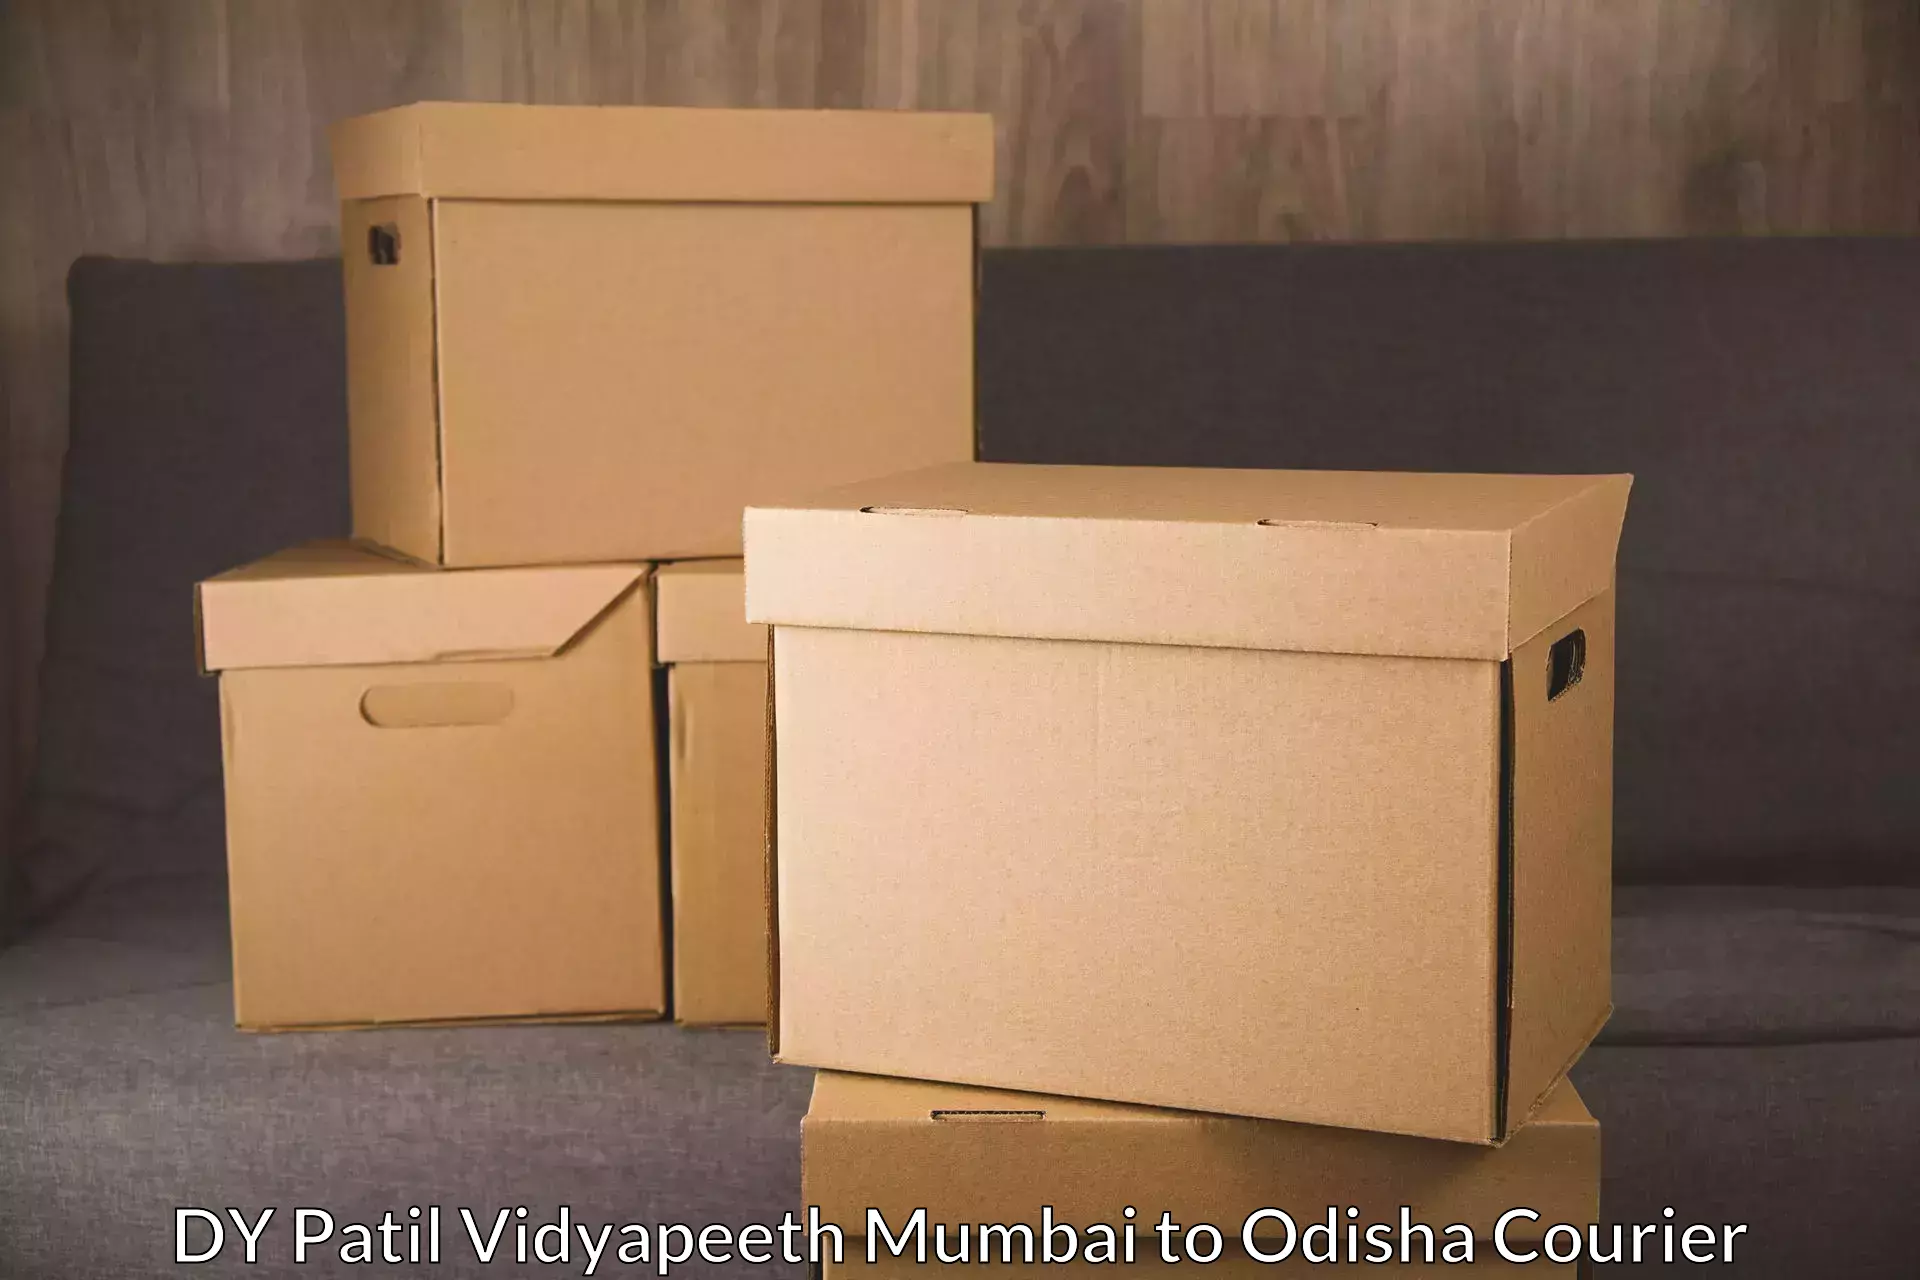 Same-day delivery solutions DY Patil Vidyapeeth Mumbai to Kendujhar